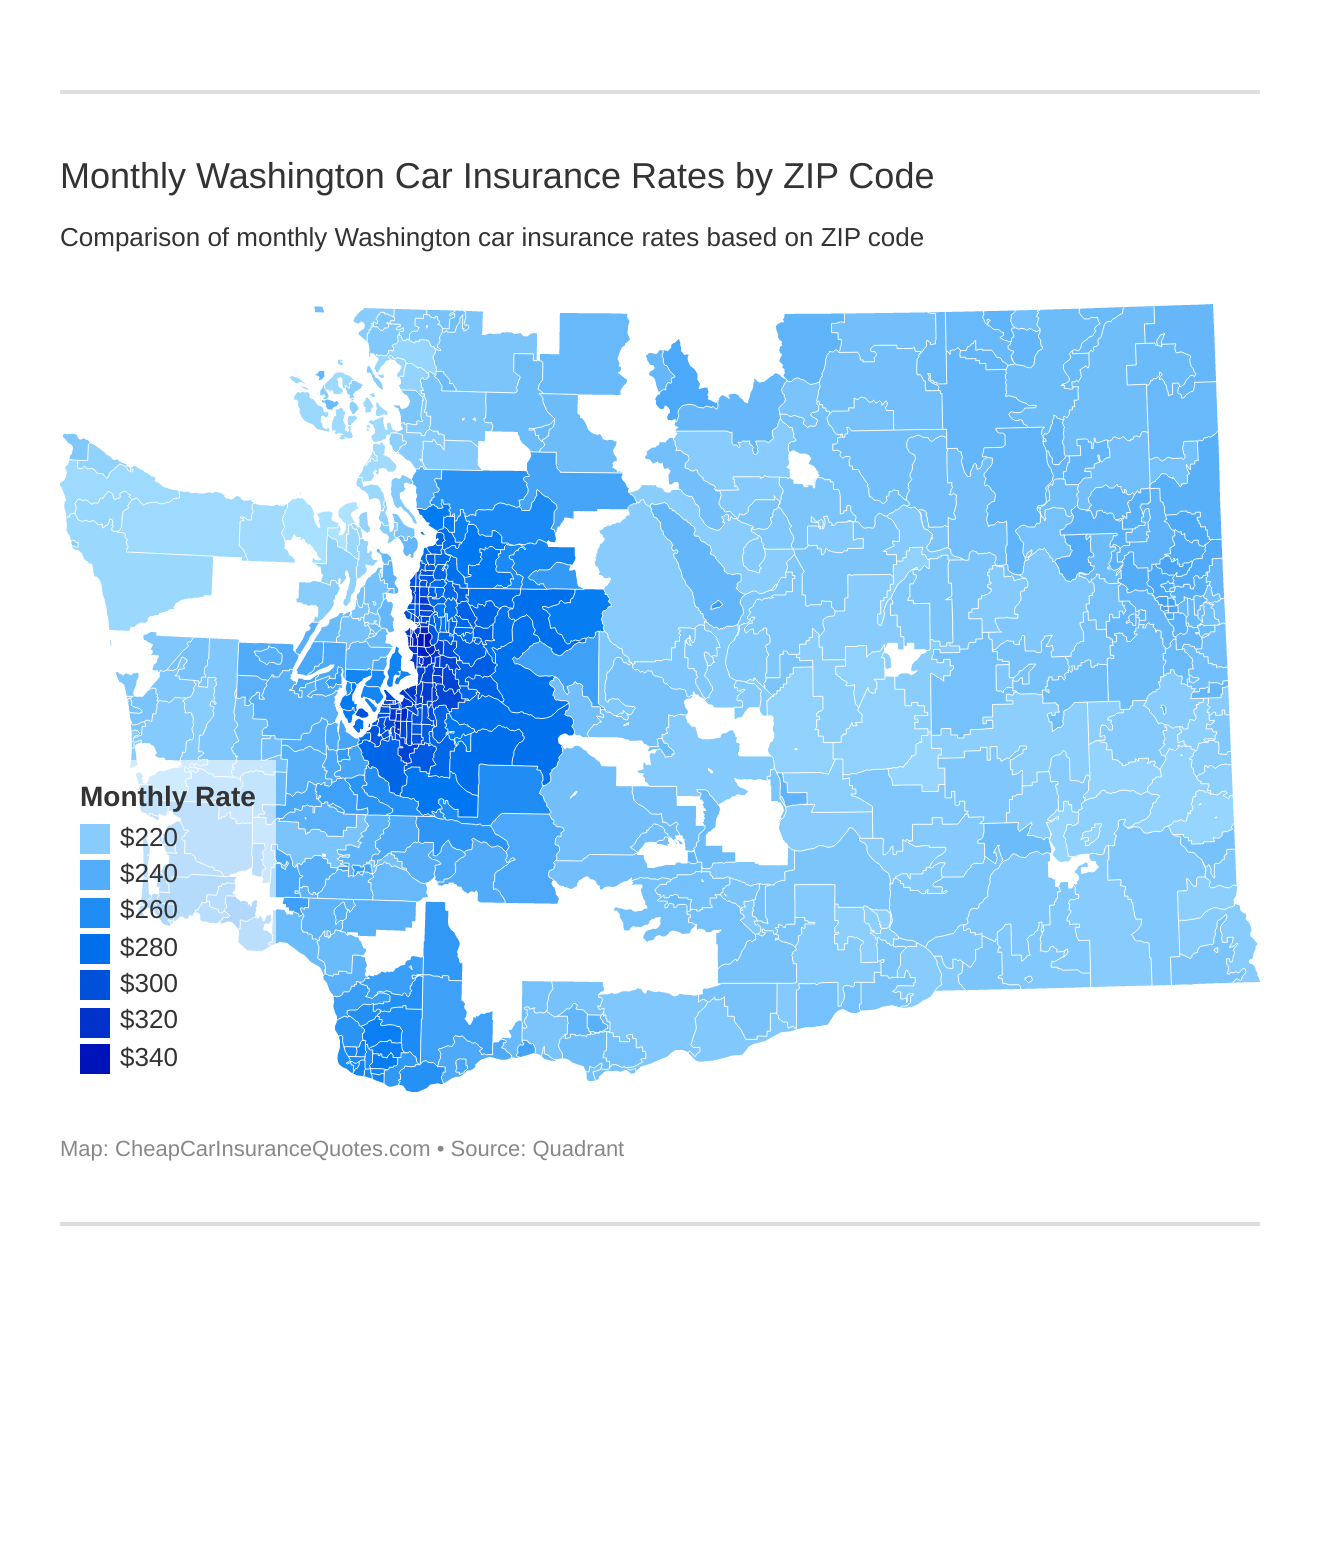 Monthly Washington Car Insurance Rates by ZIP Code